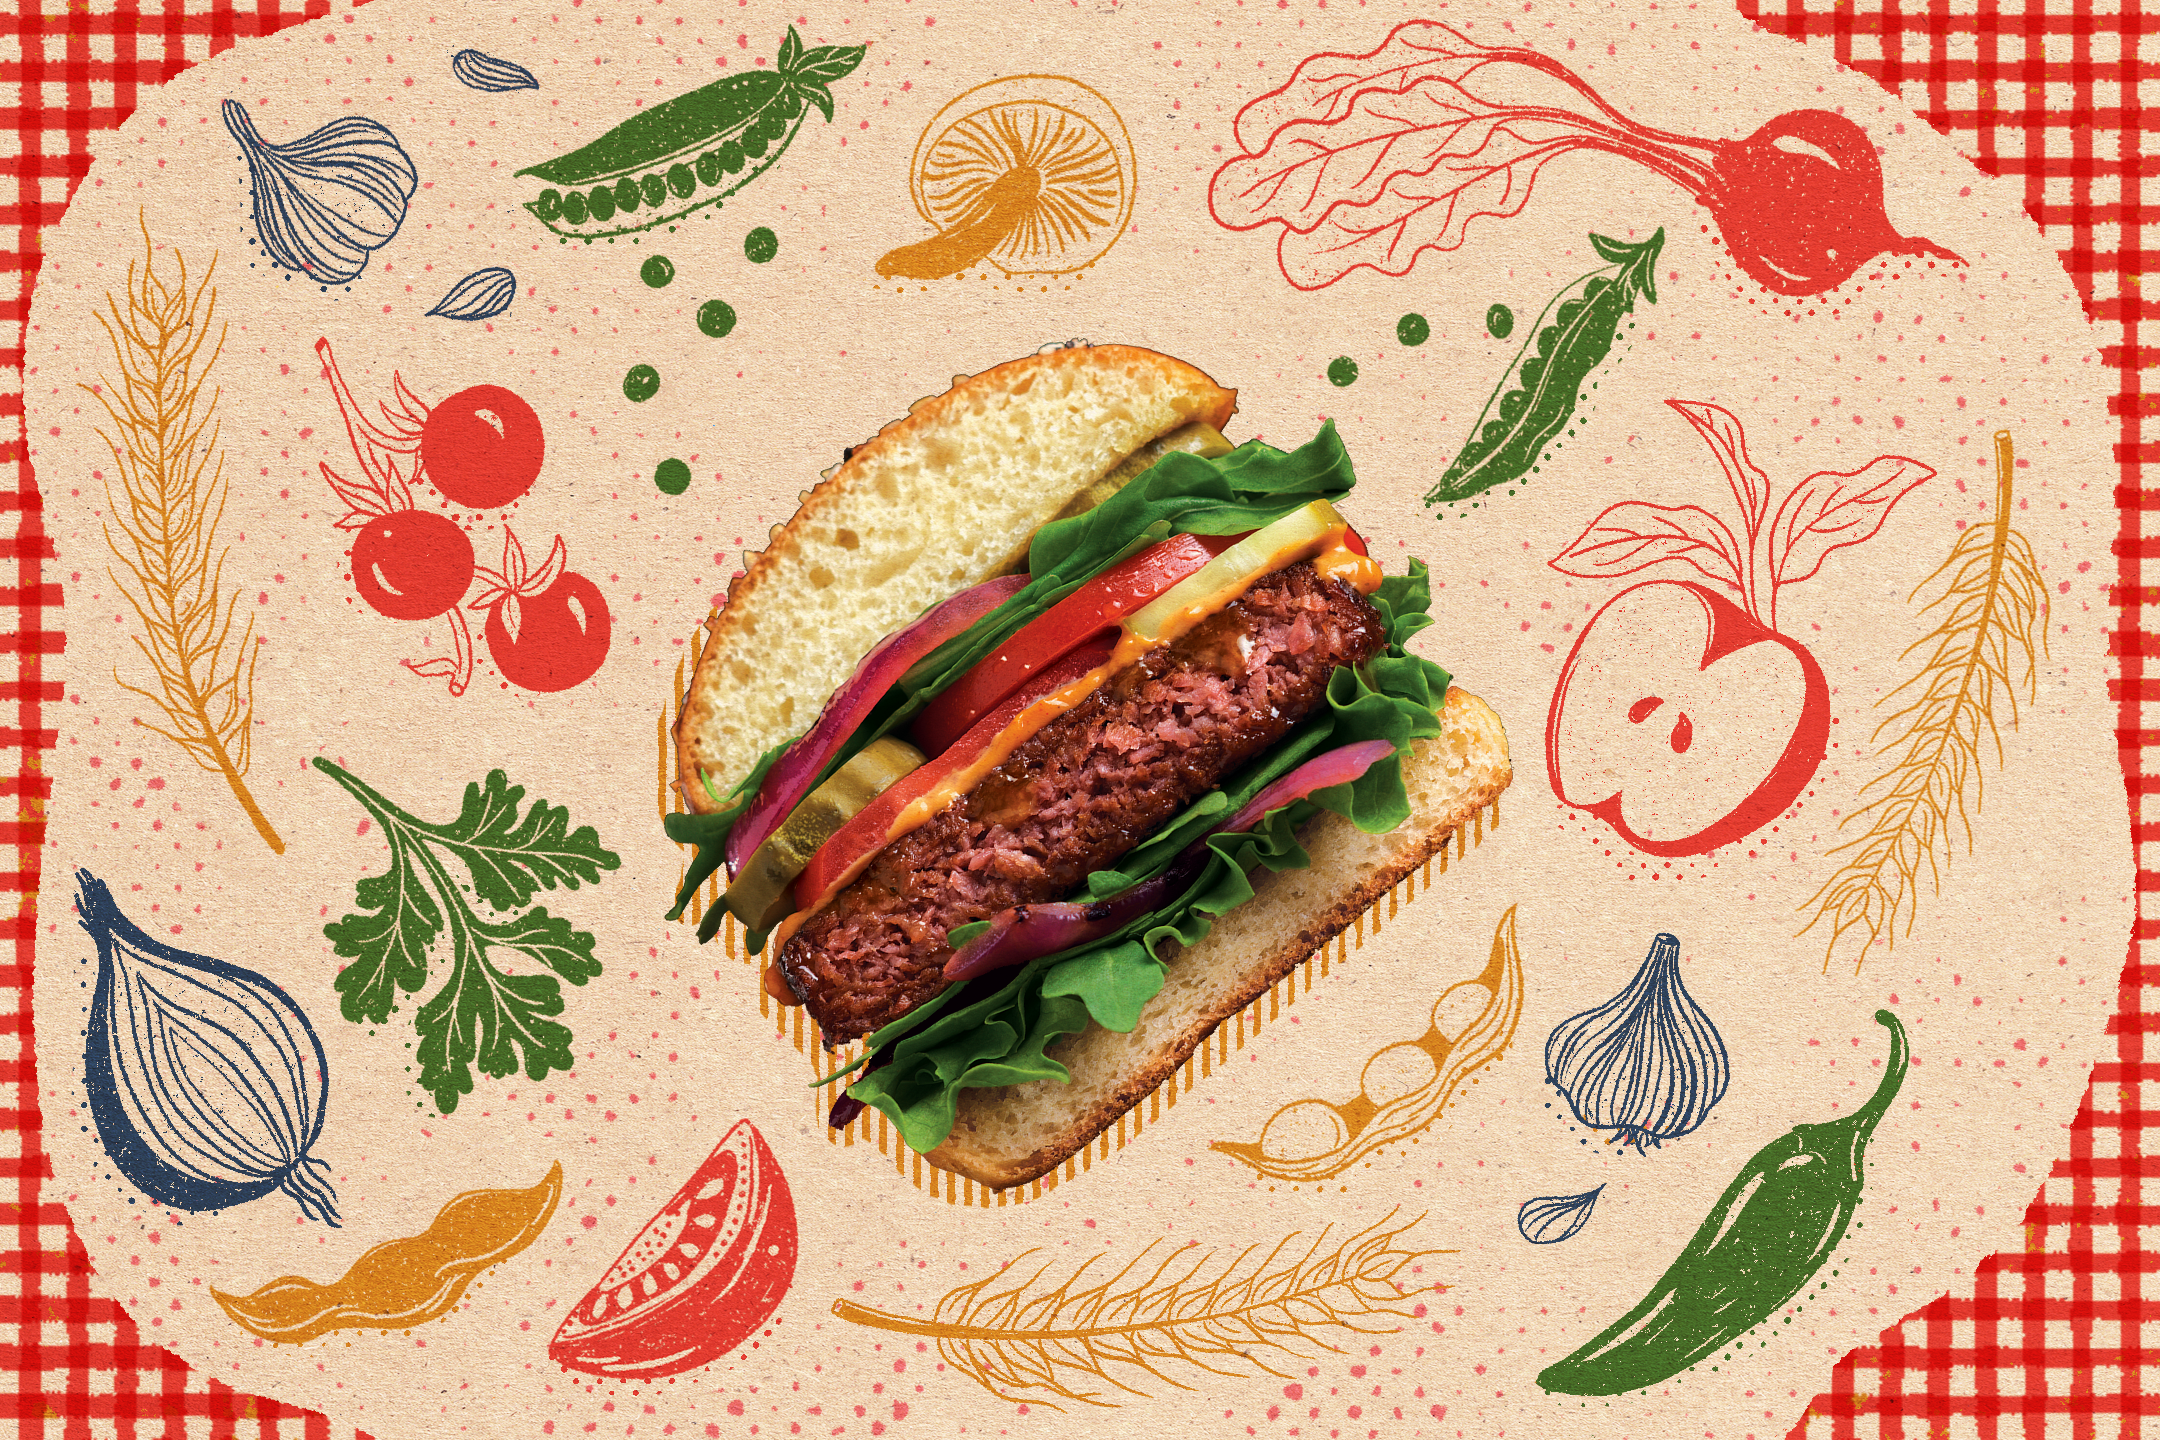   Eater x Awesome Burger   “Behind the Rise of Plant-Based Burgers”  AD: Brittany Falussy  